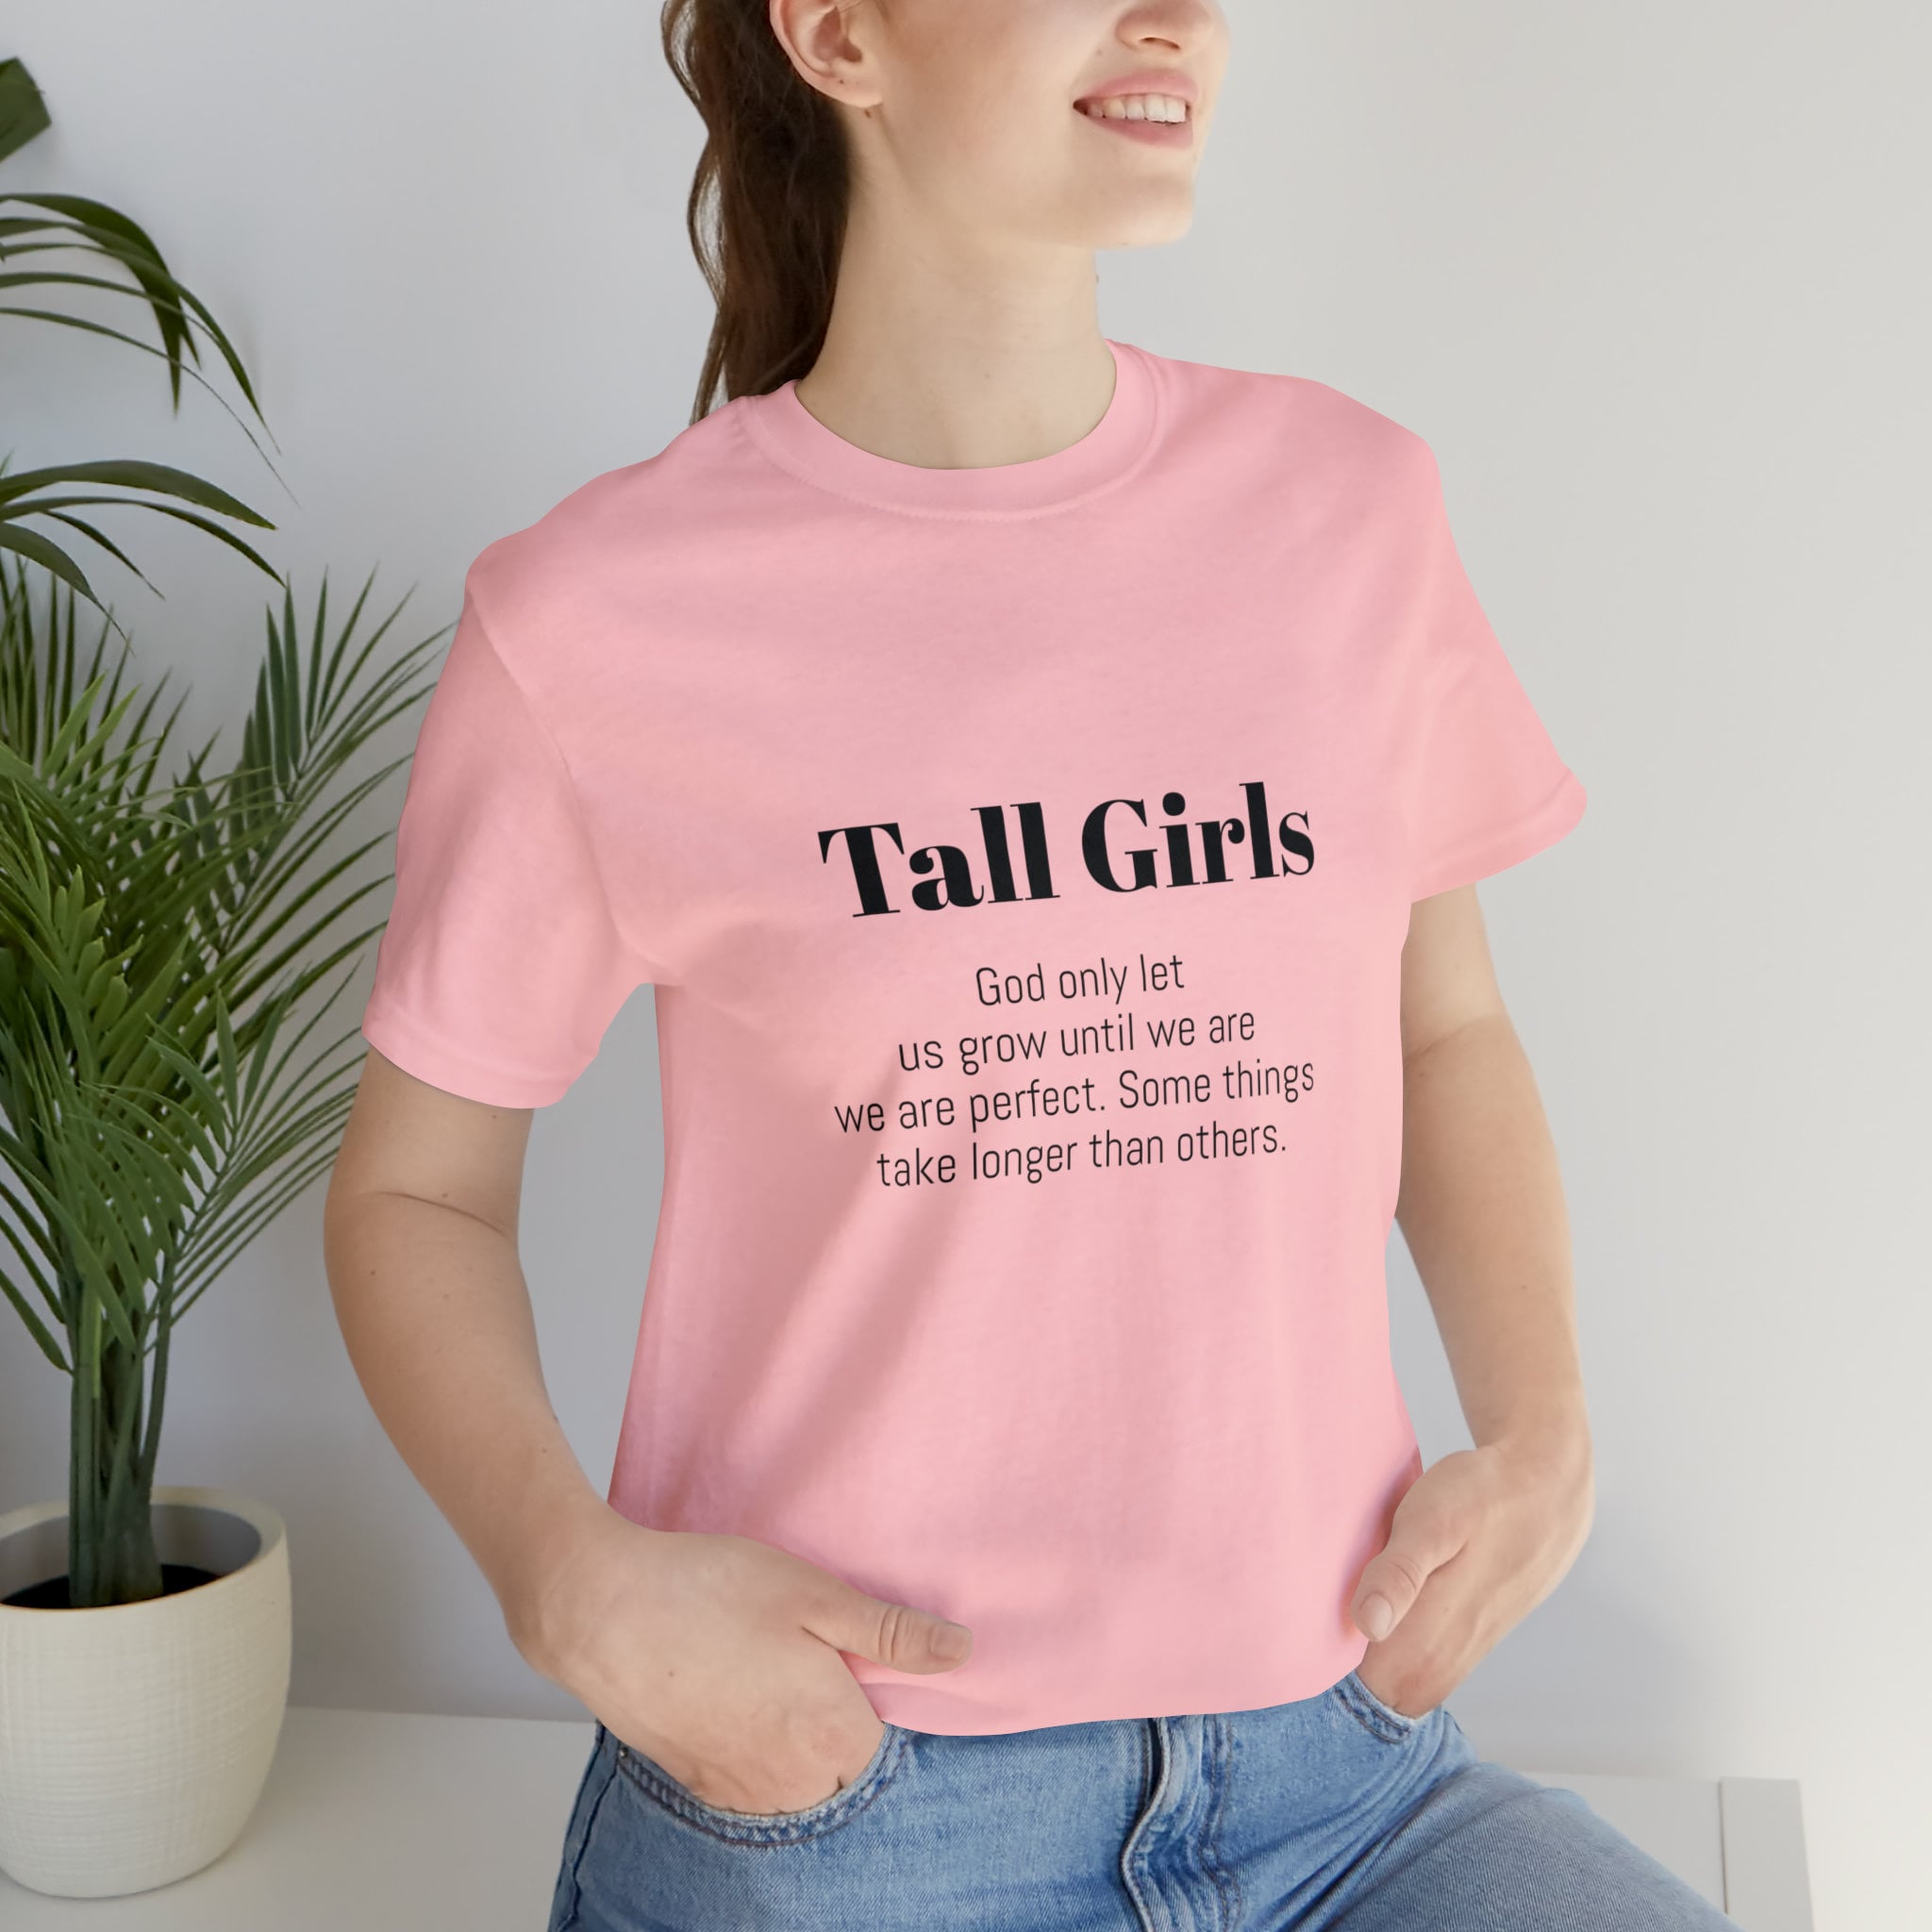 Types of tall girls